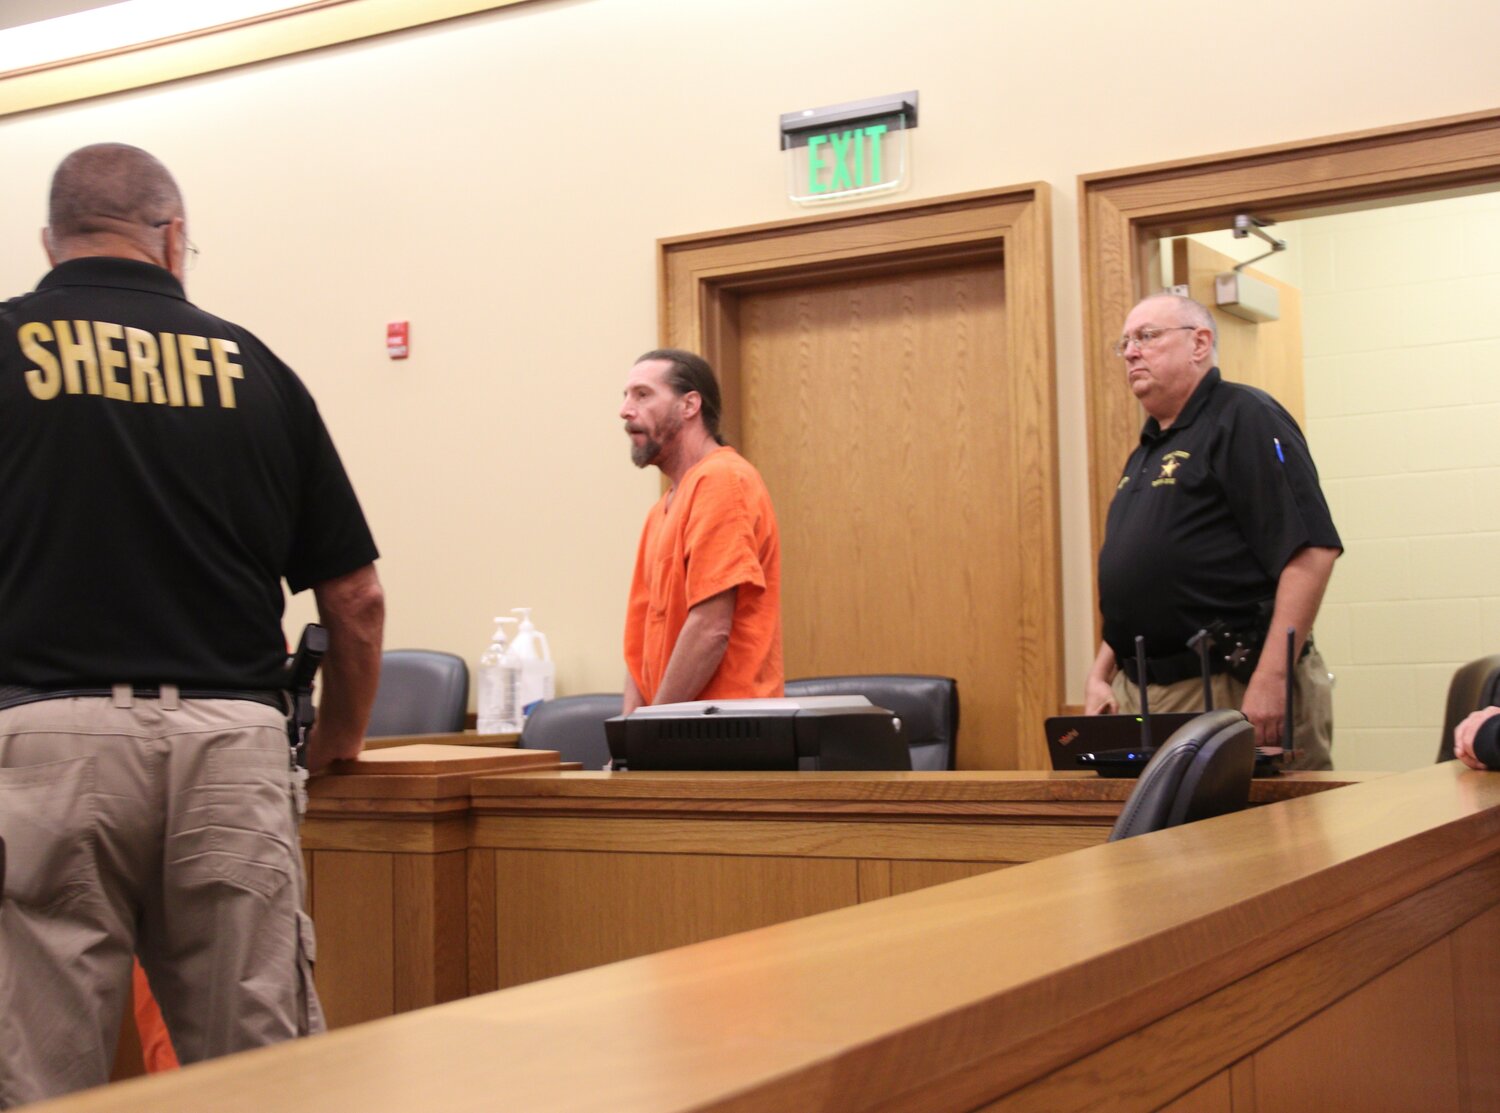 David Denney appeared in Adair Circuit Court Tuesday and entered a plea of not guilty on a murder charge. He is currently in jail on a $1 million bond.